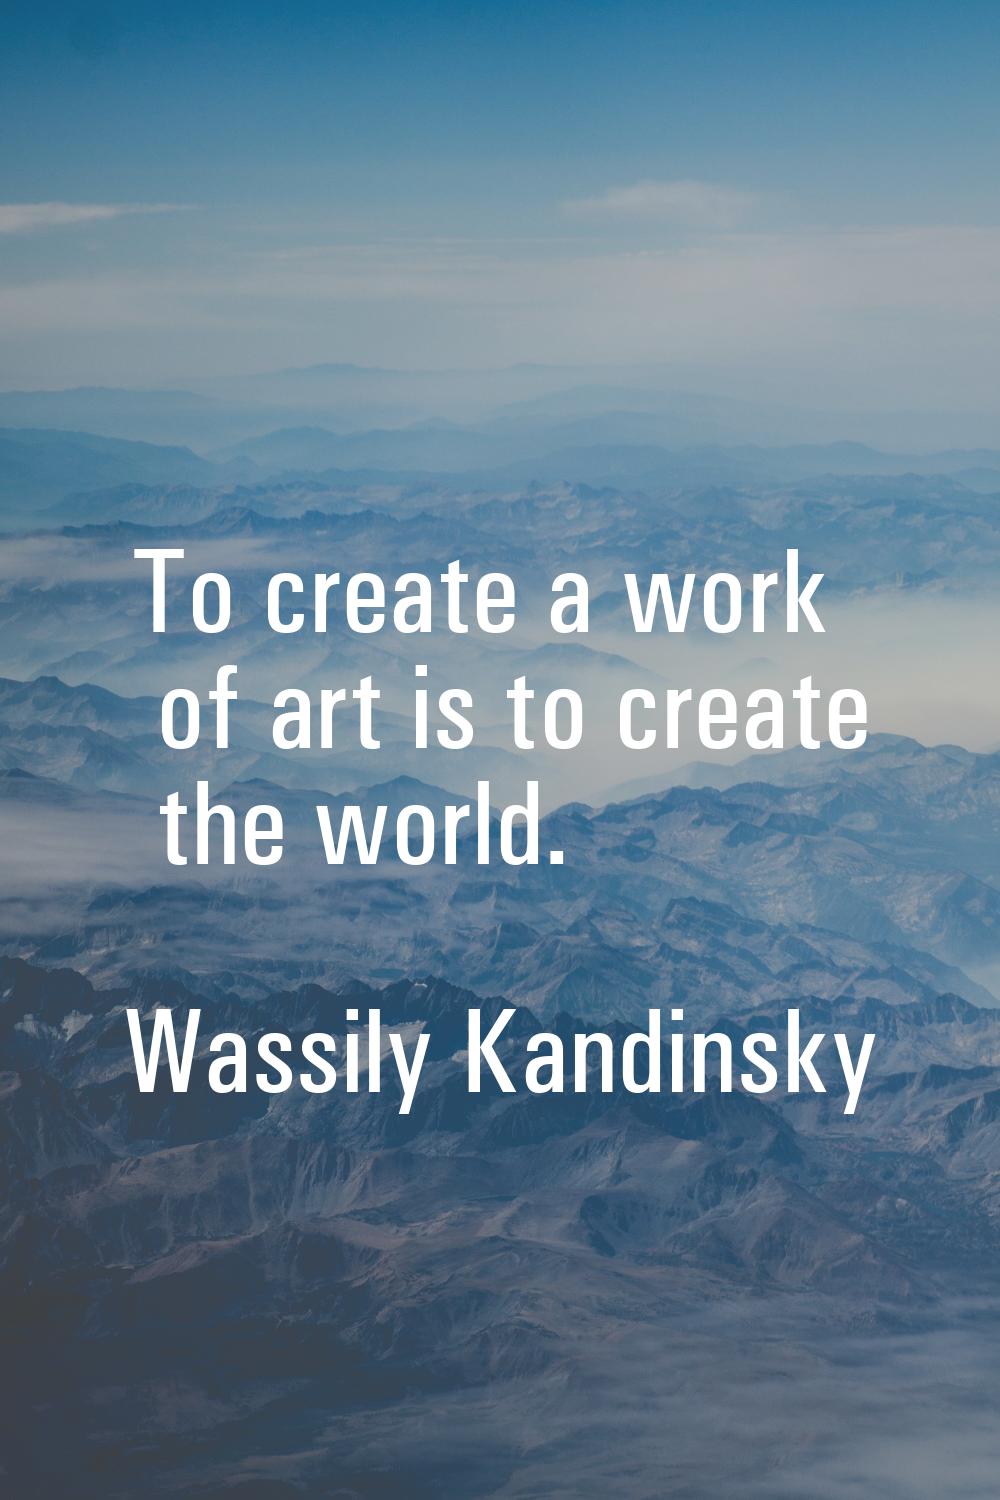 To create a work of art is to create the world.